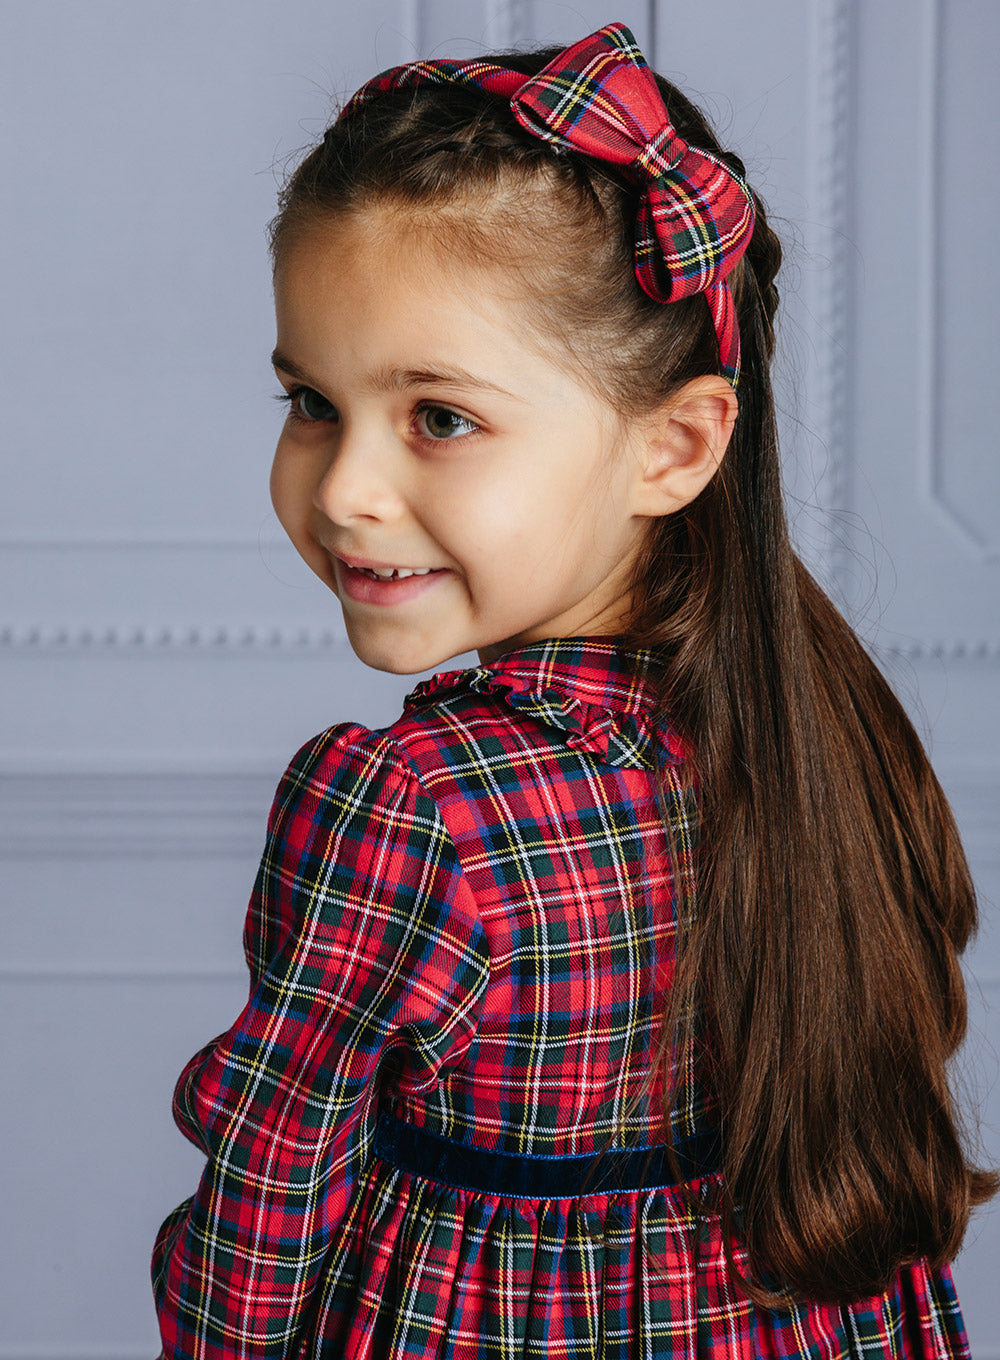 Big Bow Alice Band in Red Plaid